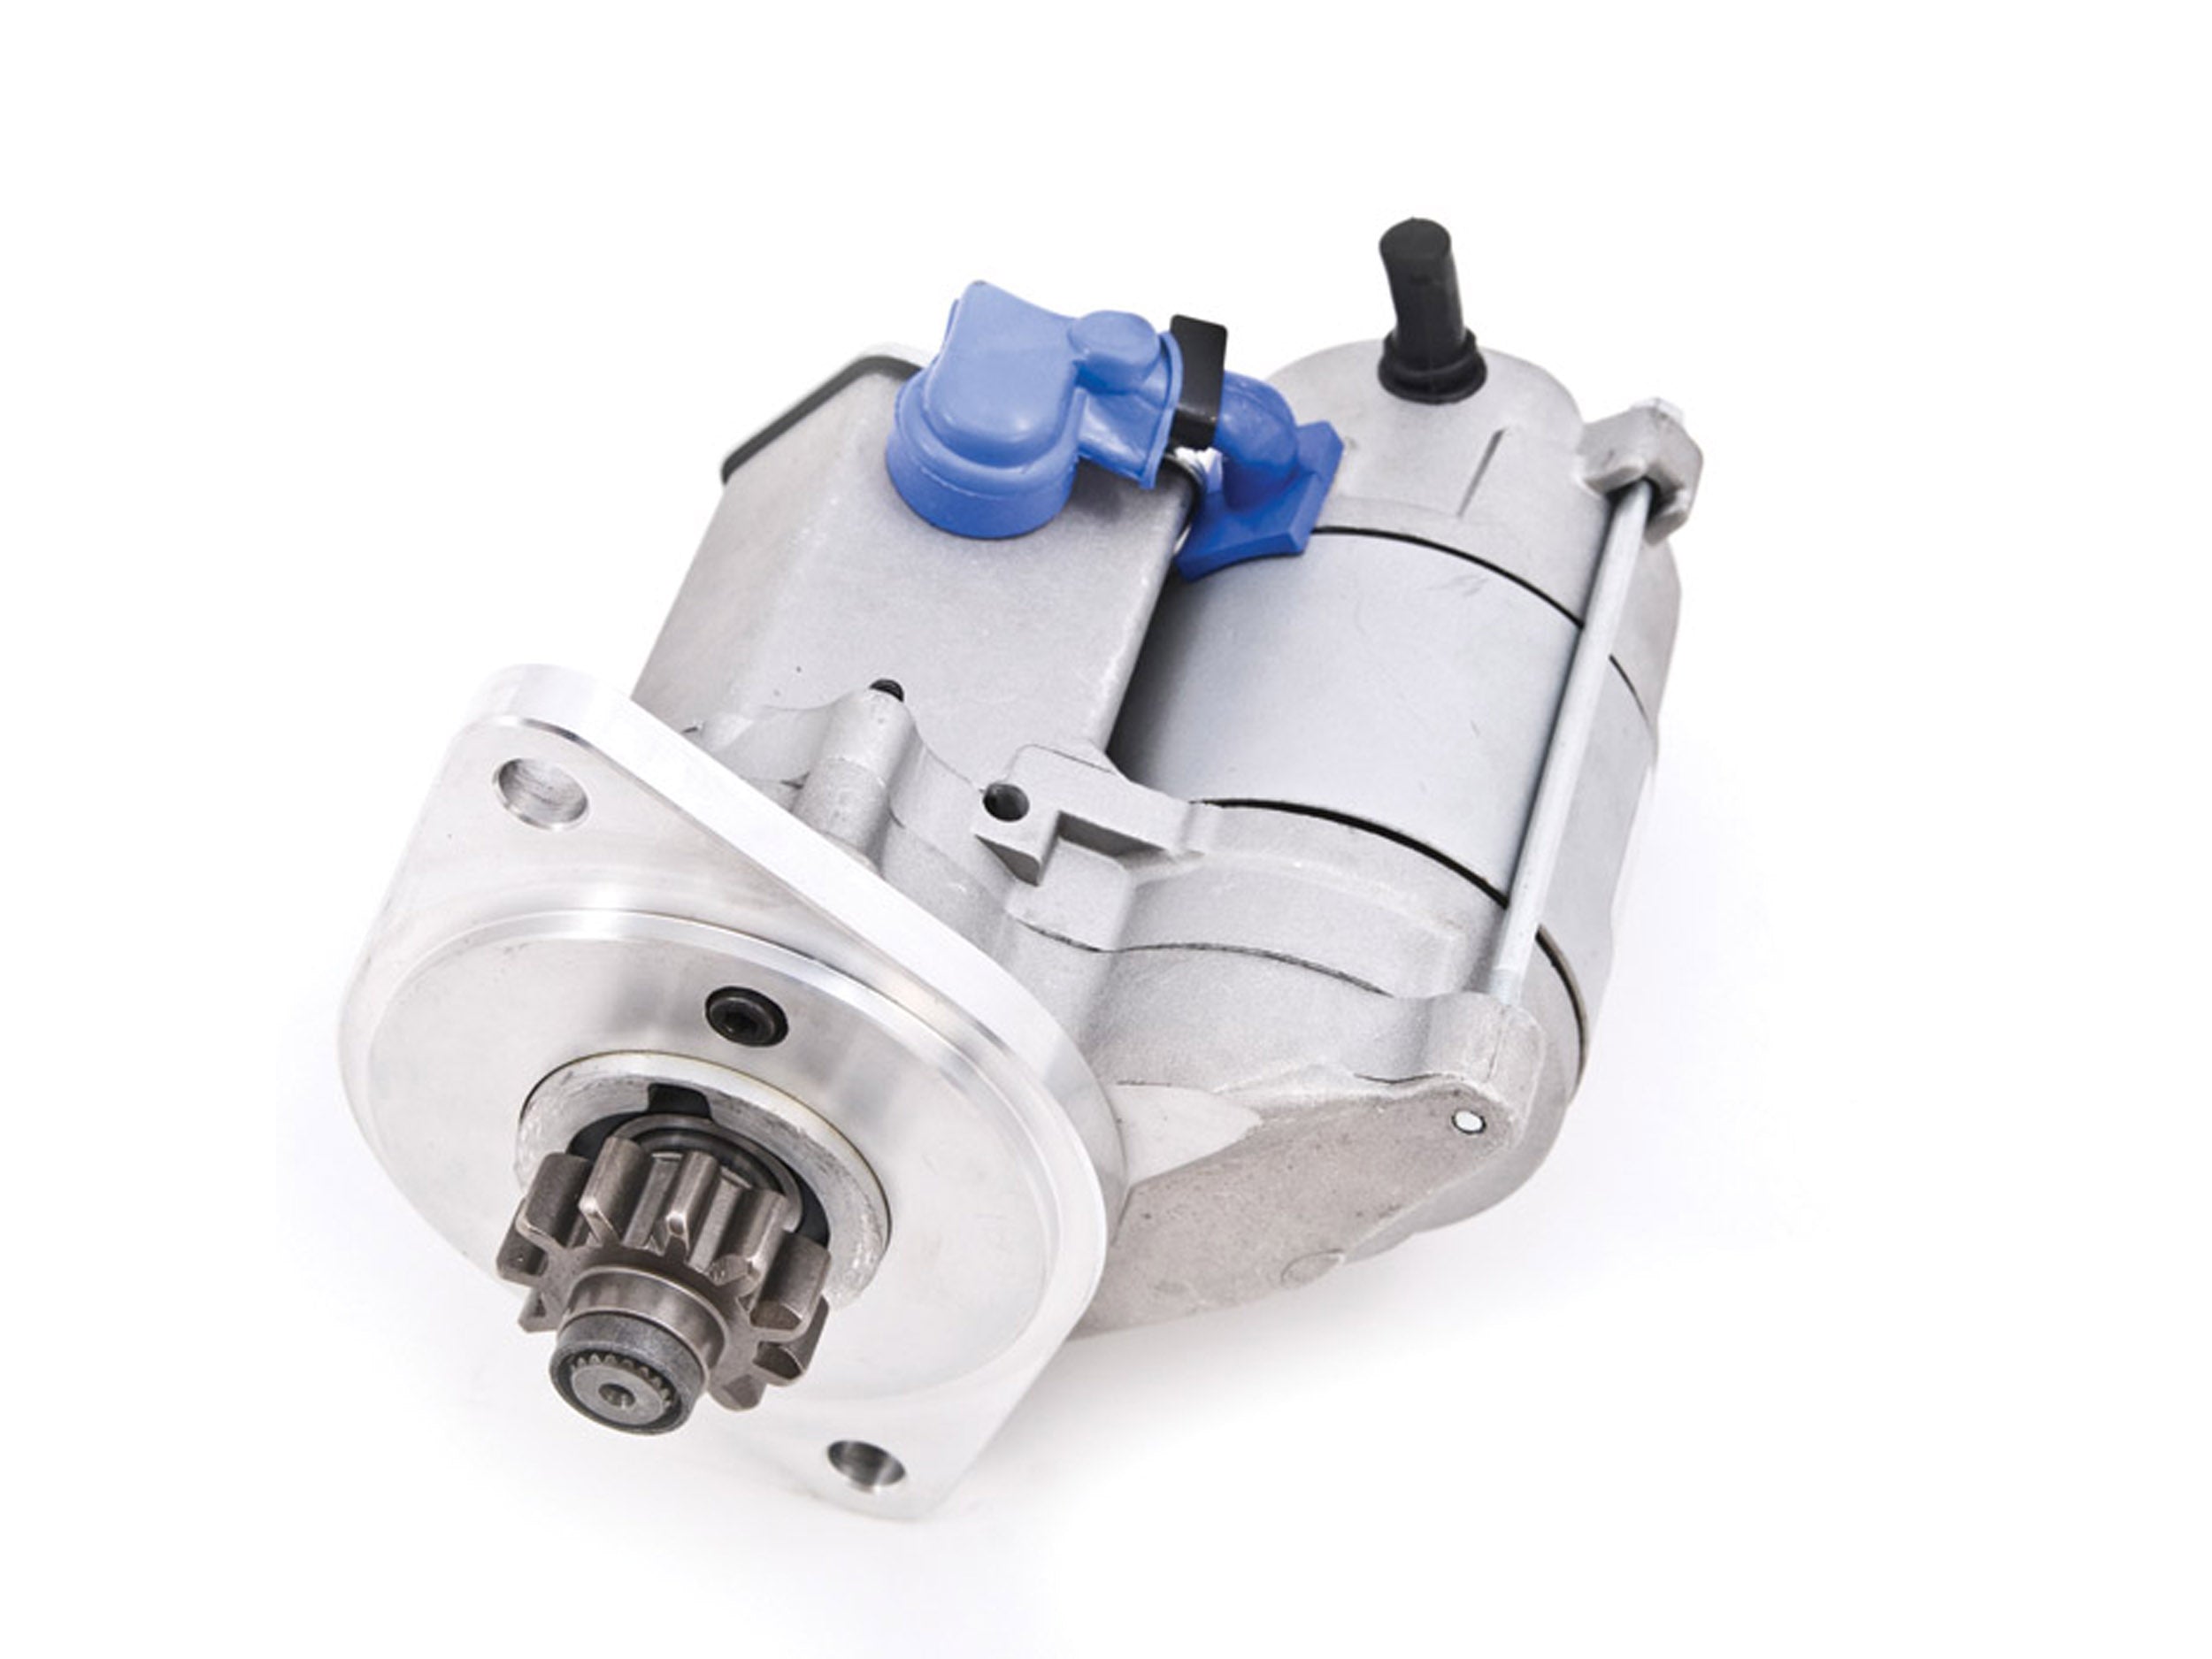 High Torque Starter Motor - for Land Rover Series II/IIA/III, Defender, Stage1, Discovery 1/2, Range Rover Classic, P38